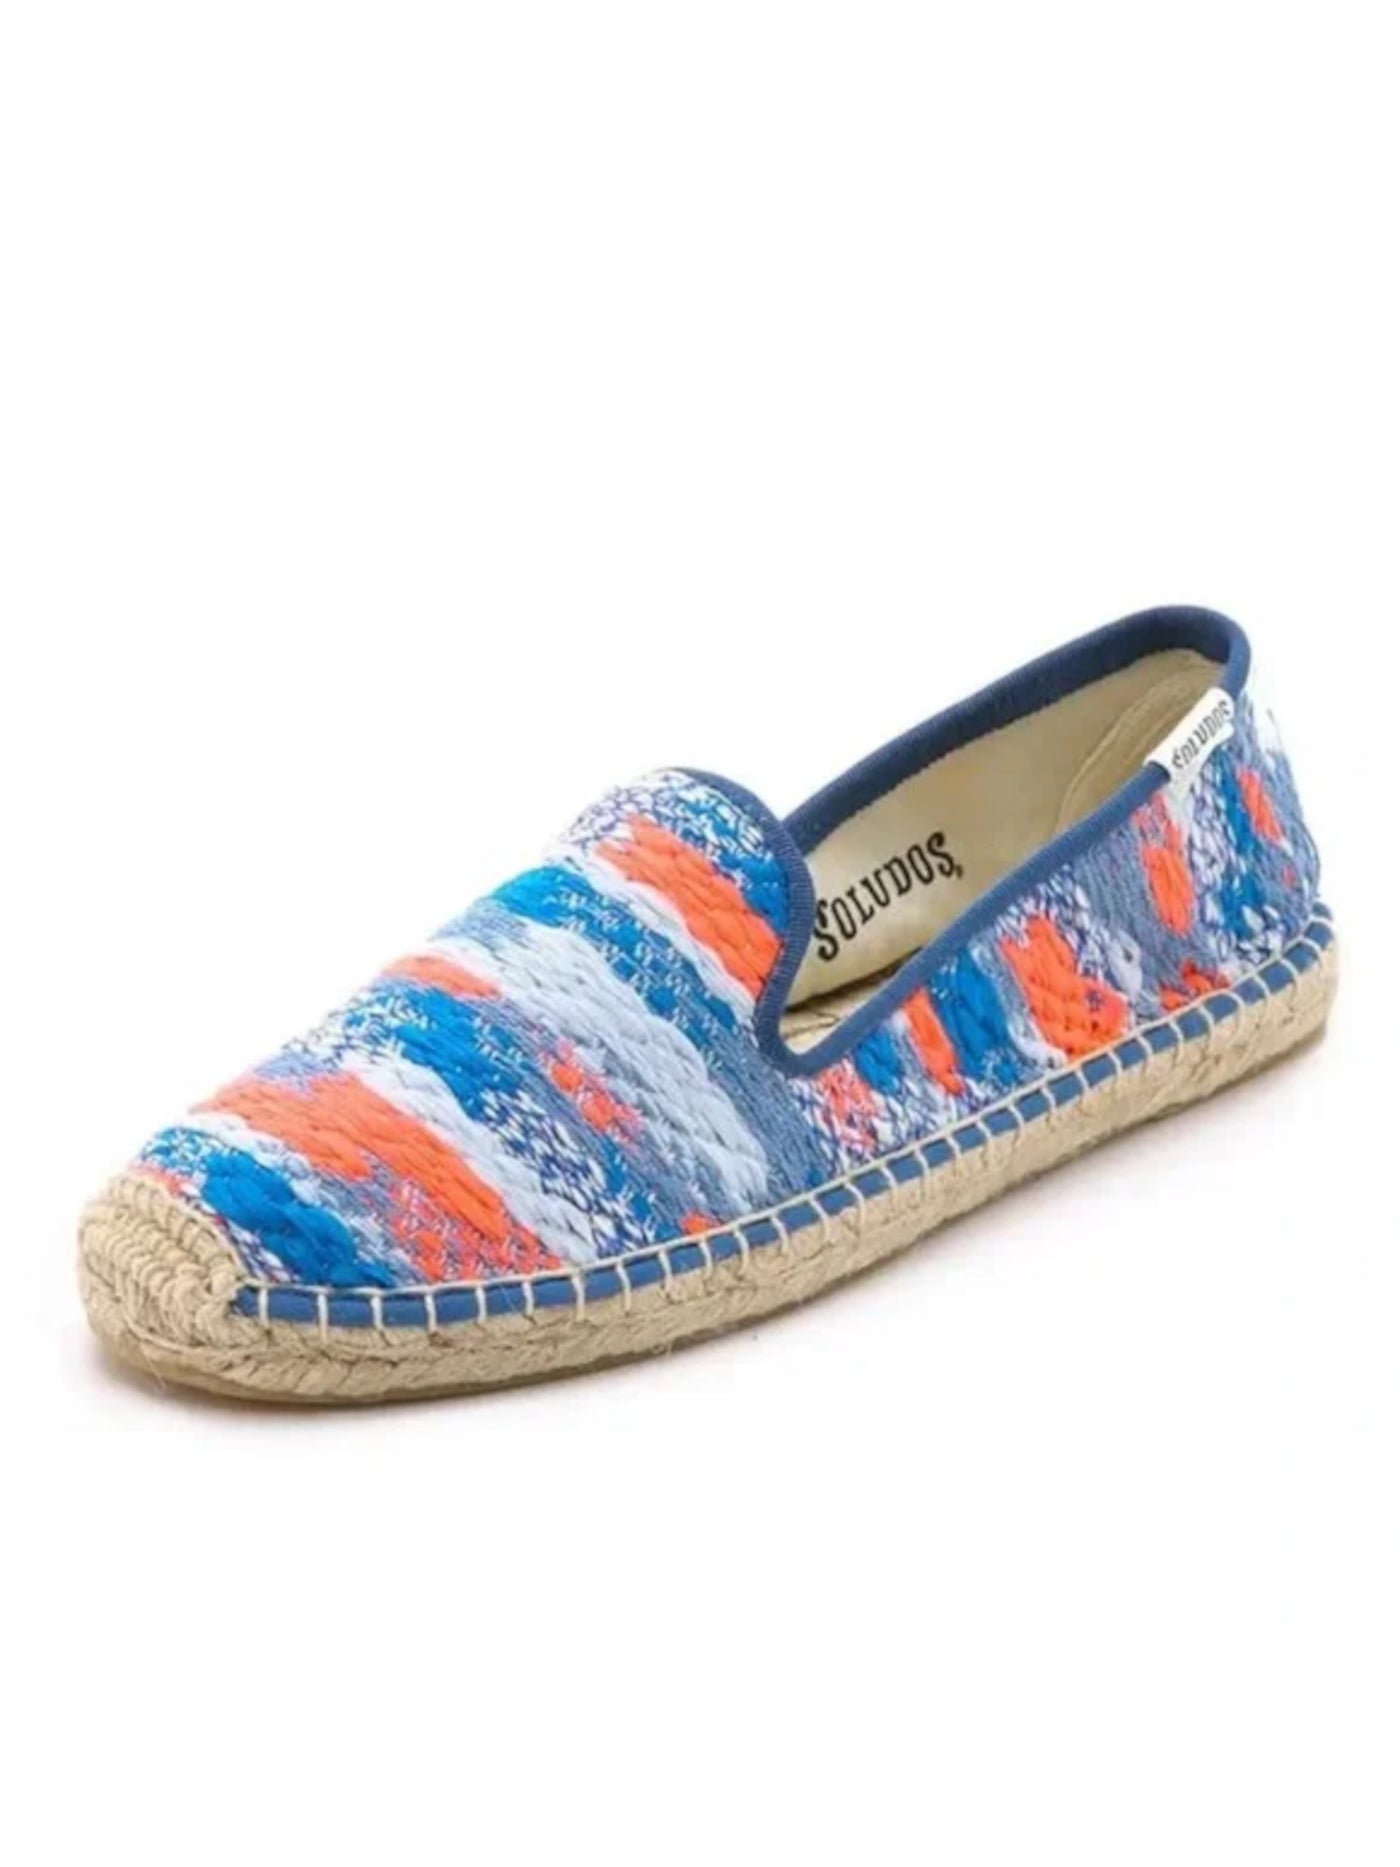 SOLUDOS Womens Blue Patterned Beef Rolled Toe Cap Round Toe Slip On Espadrille Shoes 6